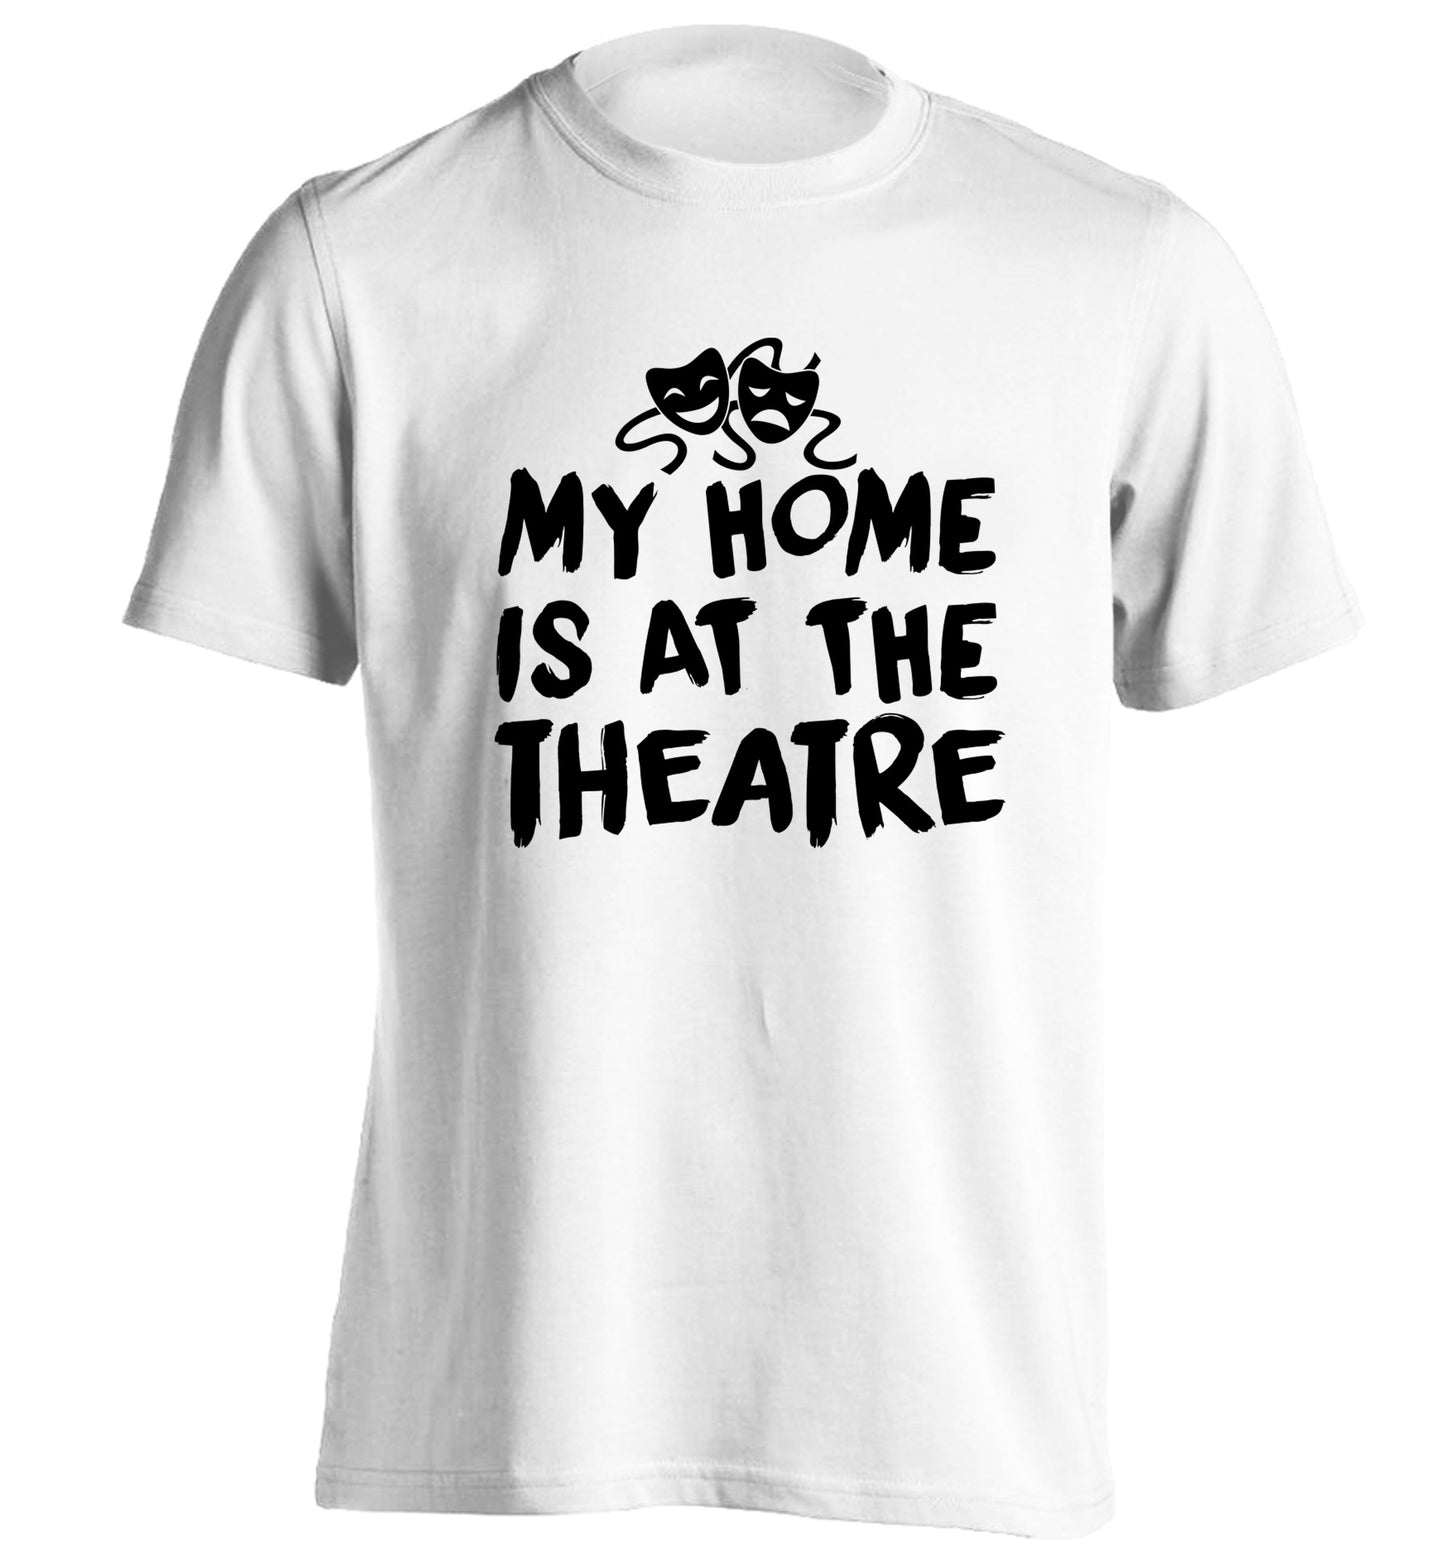 My home is at the theatre adults unisex white Tshirt 2XL